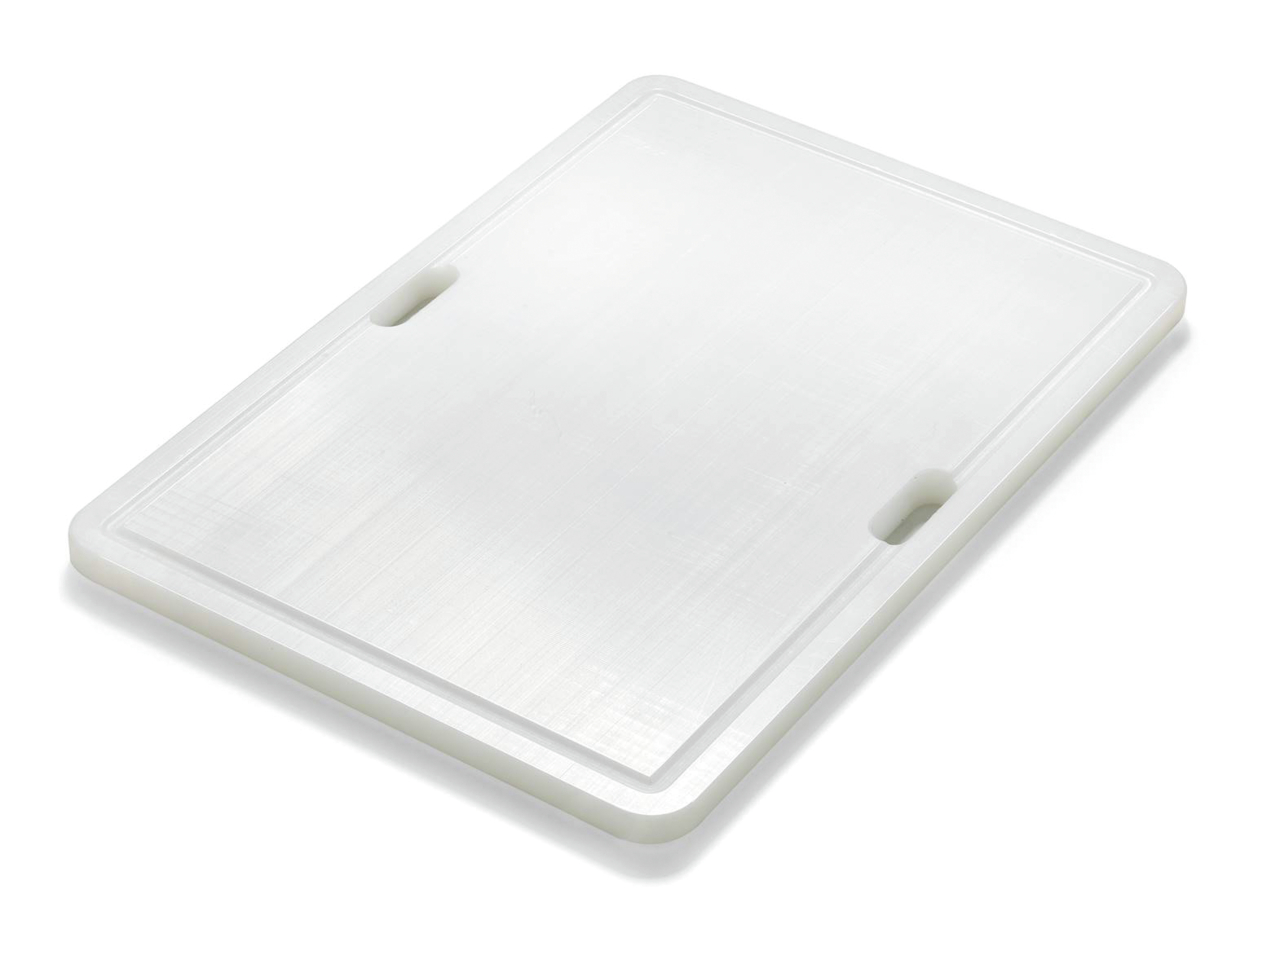  Cutting board made of plastic, white